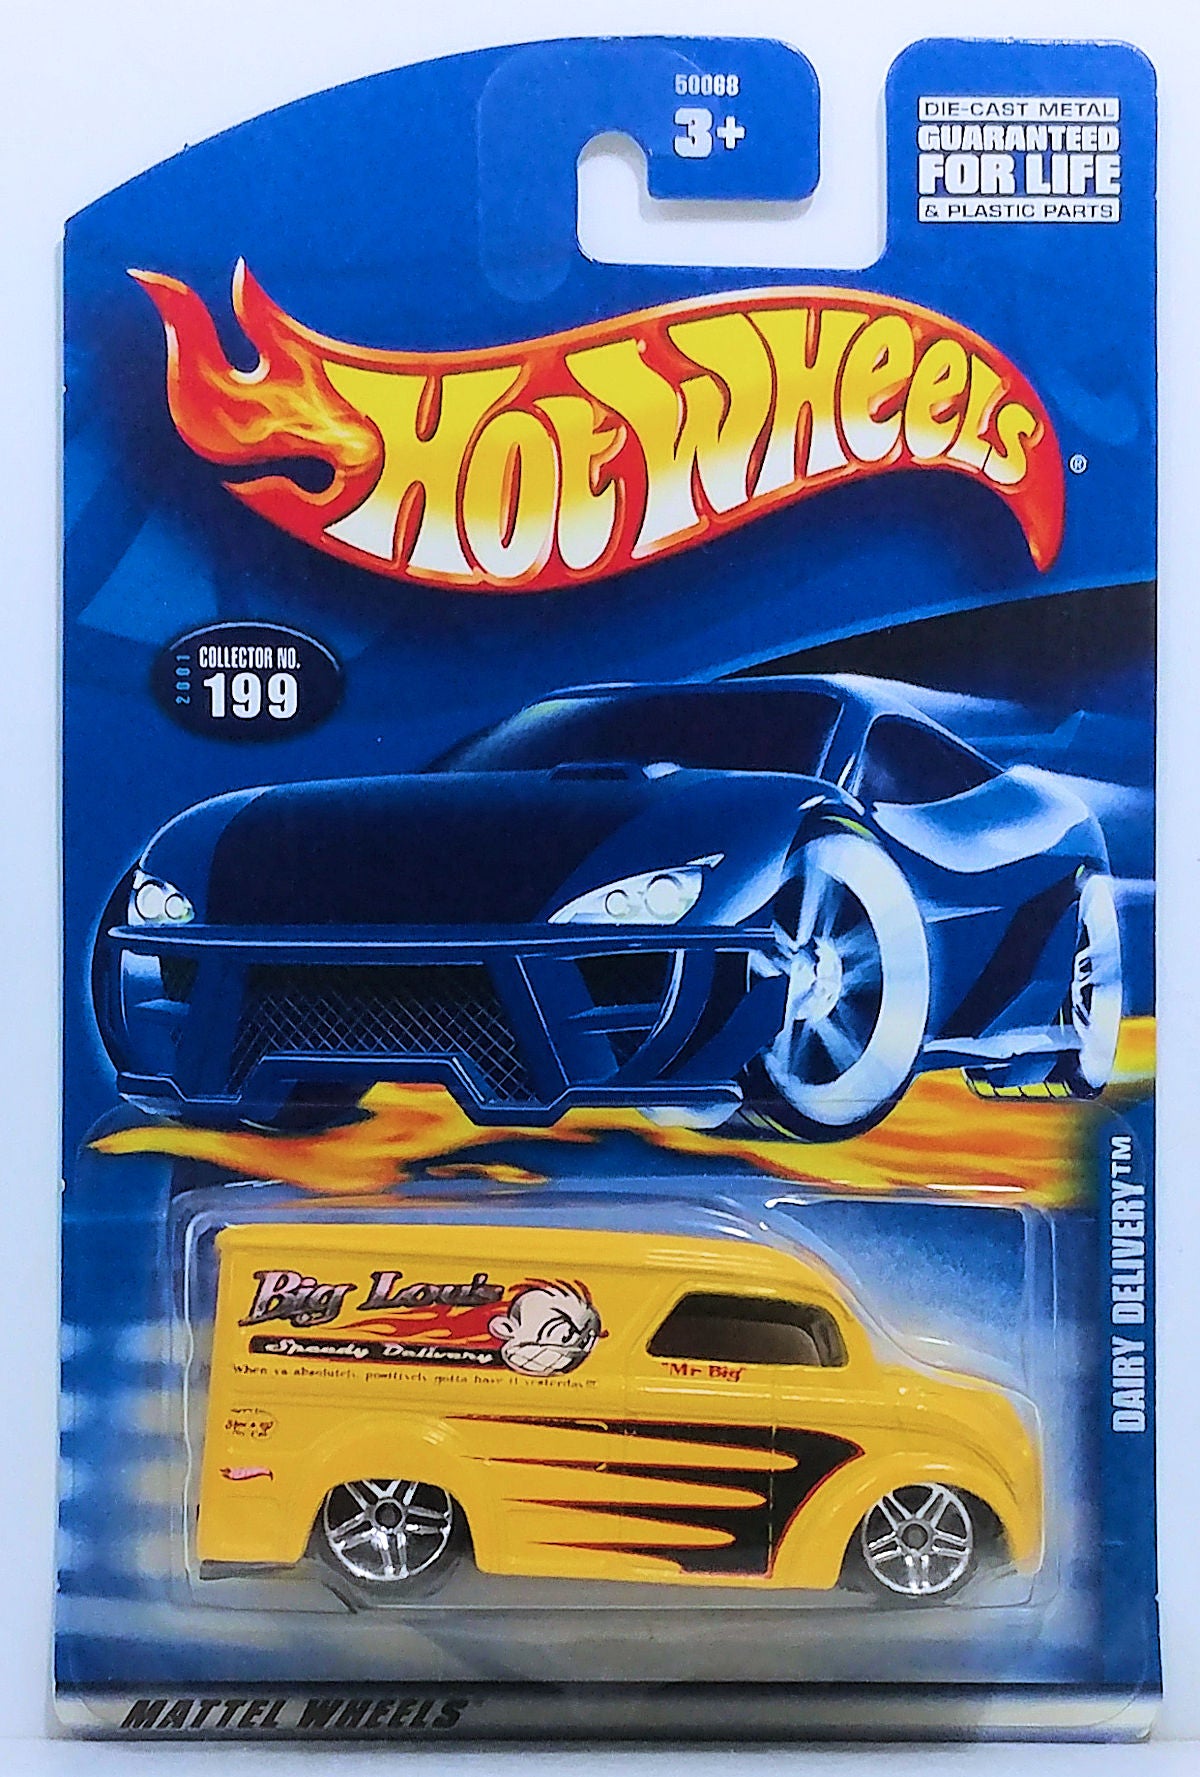 Hot Wheels 2001 - Collector # 199/240 - Dairy Delivery - Yellow / Big Lou's Speedy Delivery - China Base - USA Card